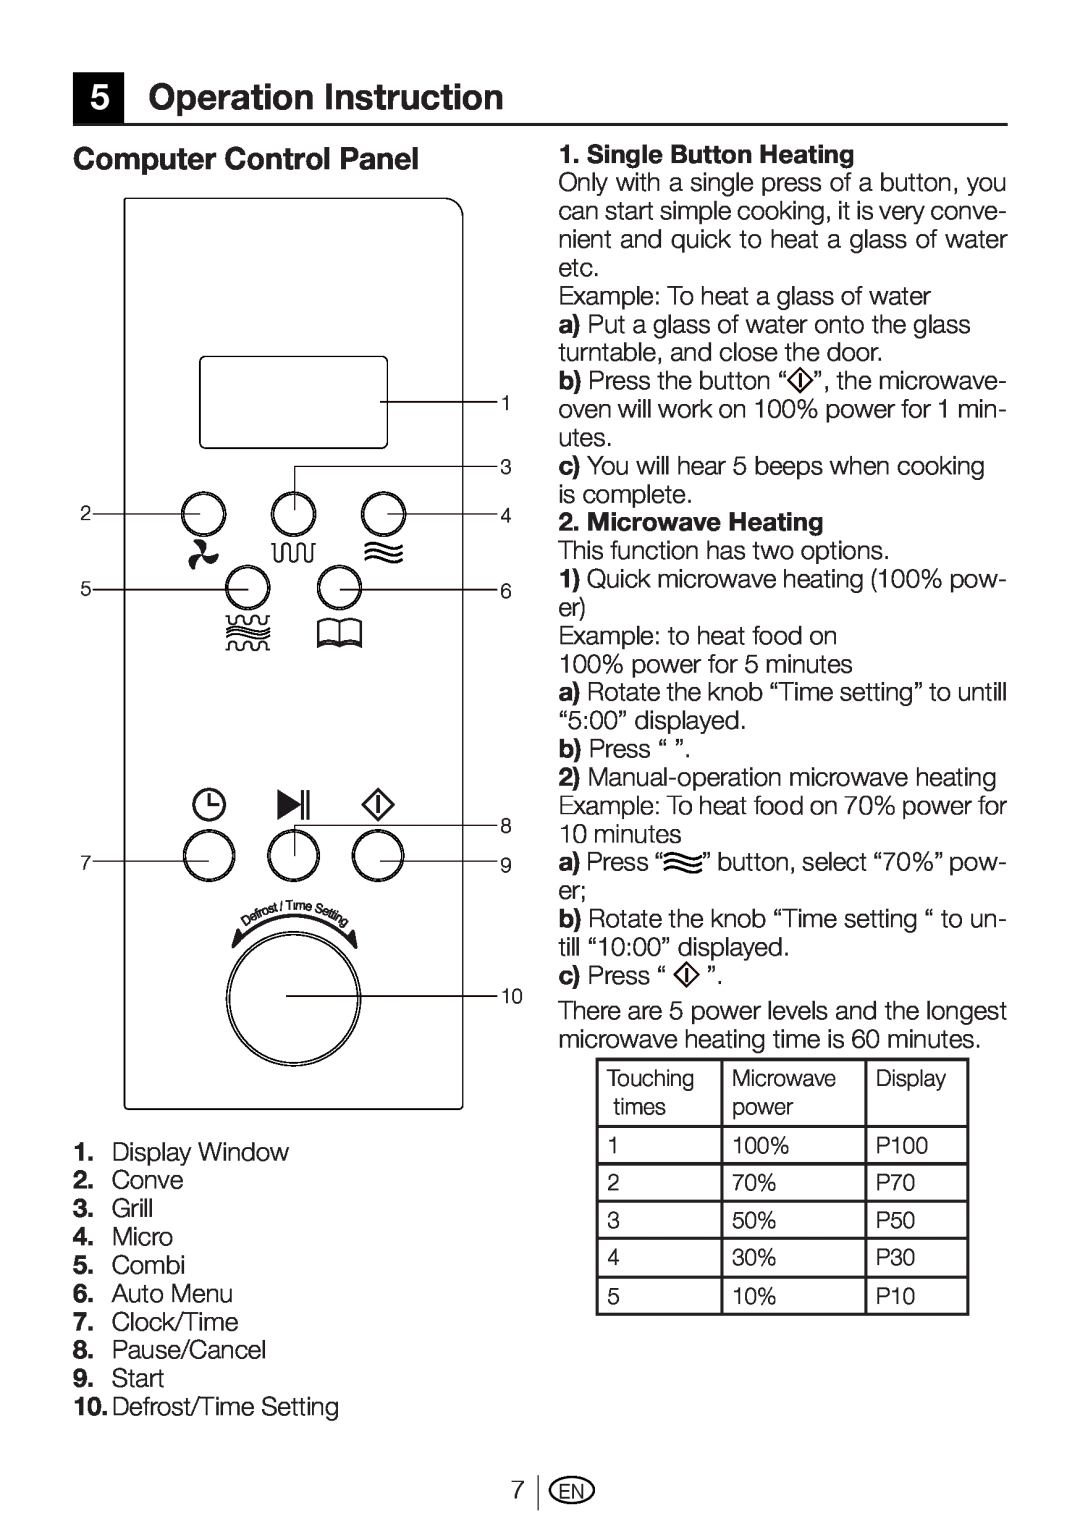 Beko MWB 3010 user manual Operation Instruction, Computer Control Panel, Single Button Heating, Microwave Heating 